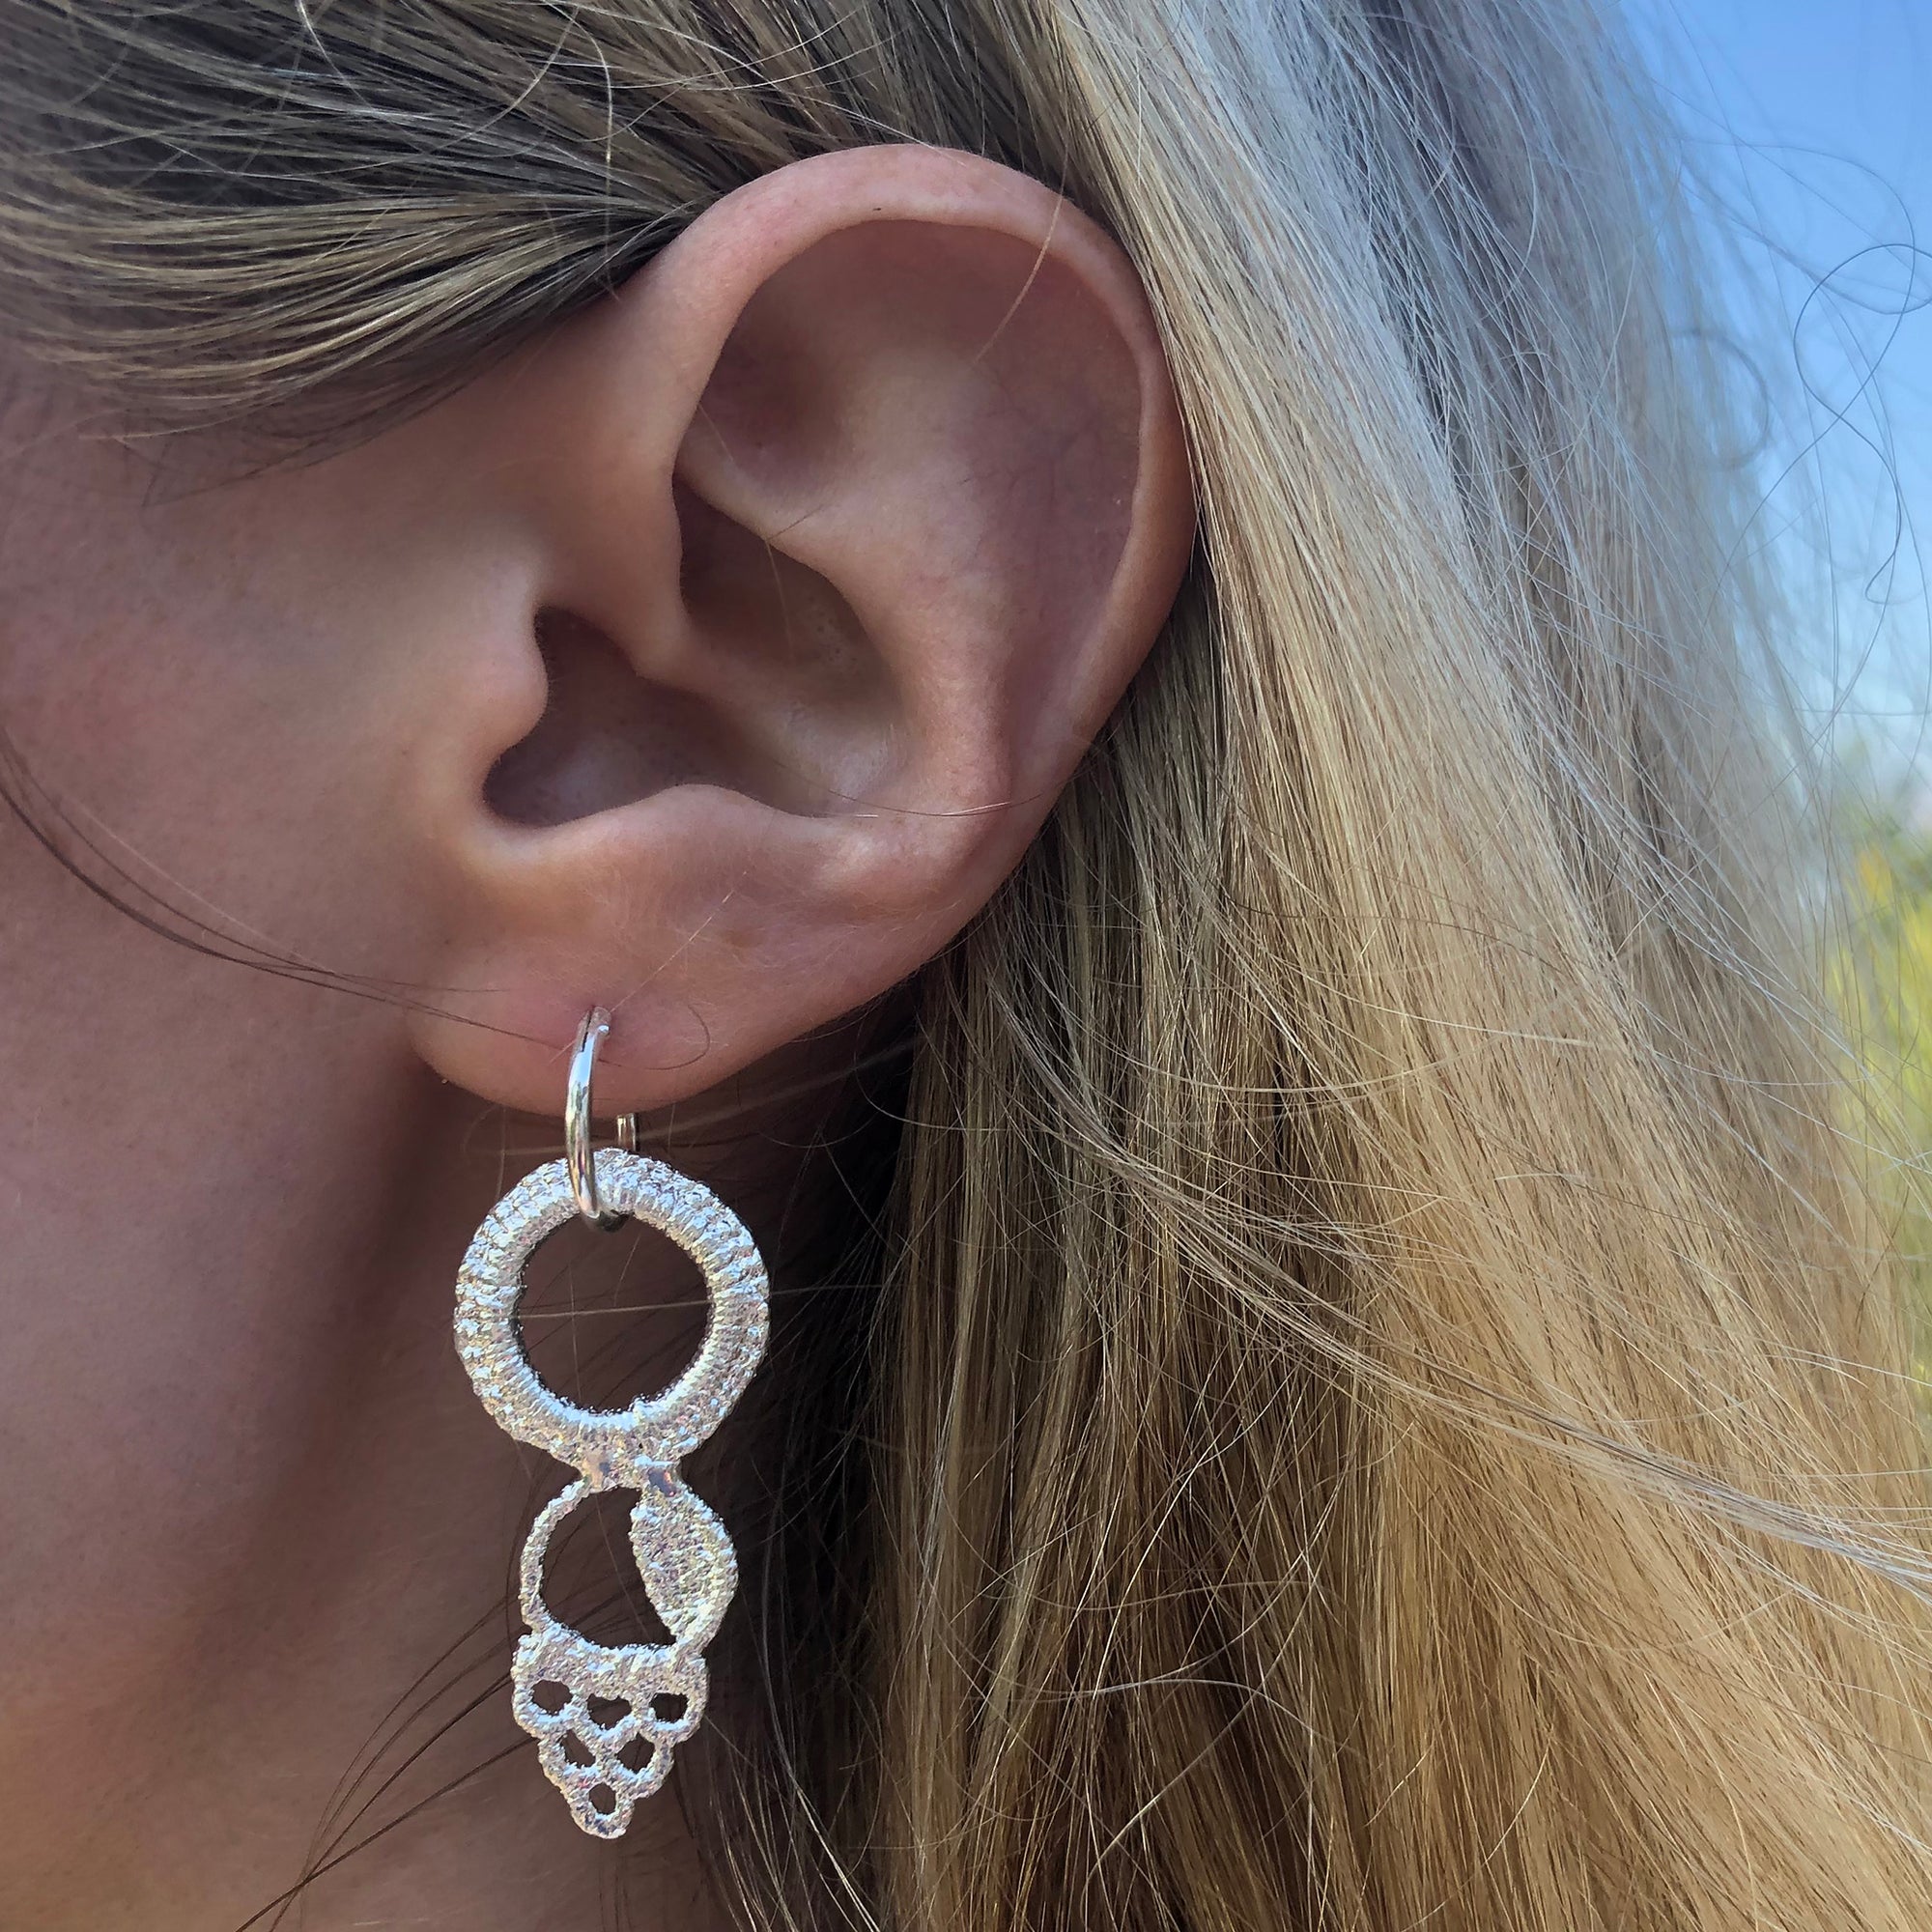 Hoop earrings made from Art Deco lace dipped in sterling silver, handmade in New York.